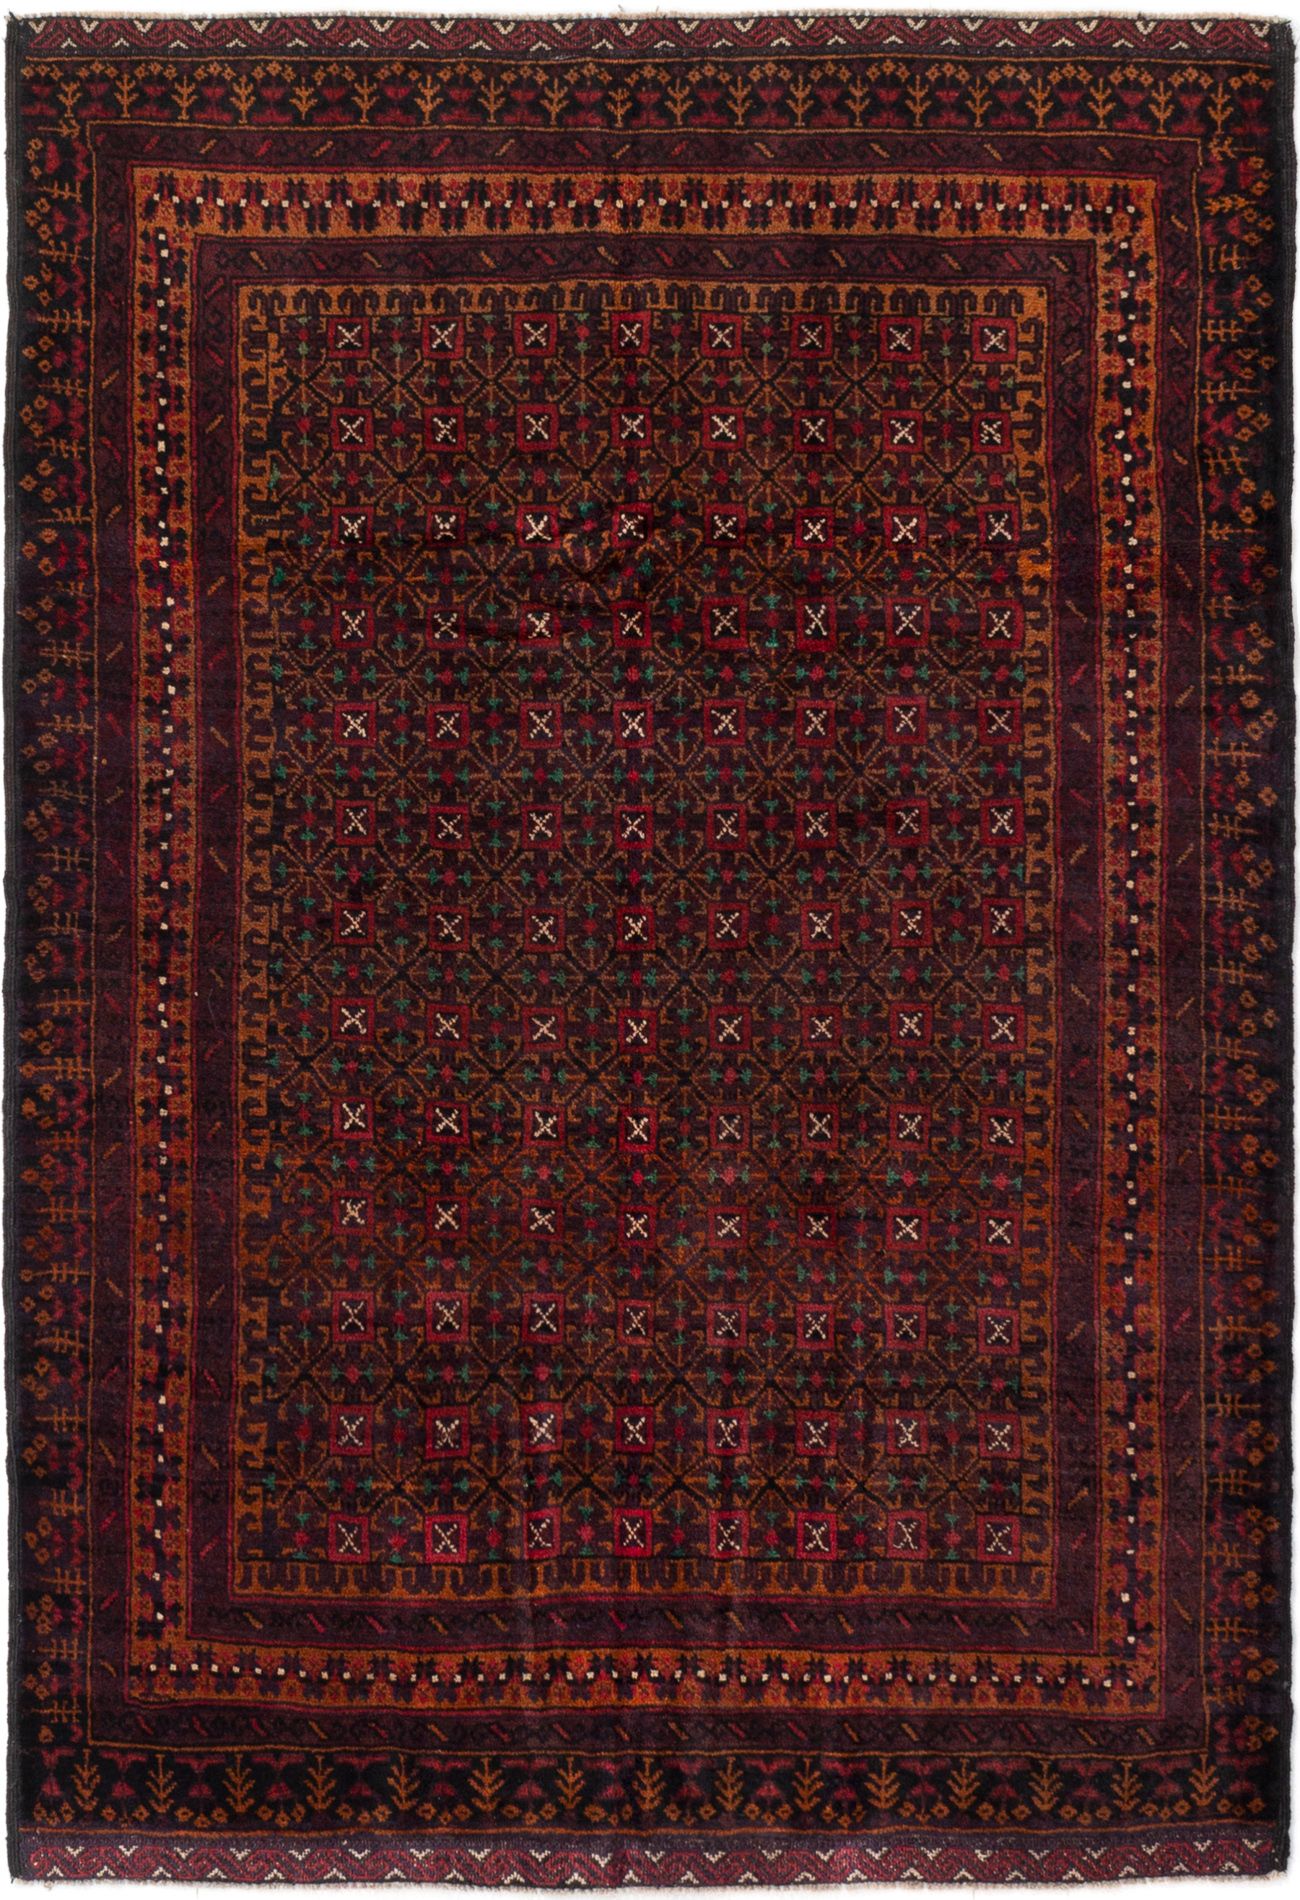 Hand-knotted Teimani Dark Red, Light Brown Wool Rug 4'3" x 5'11" Size: 4'3" x 5'11"  